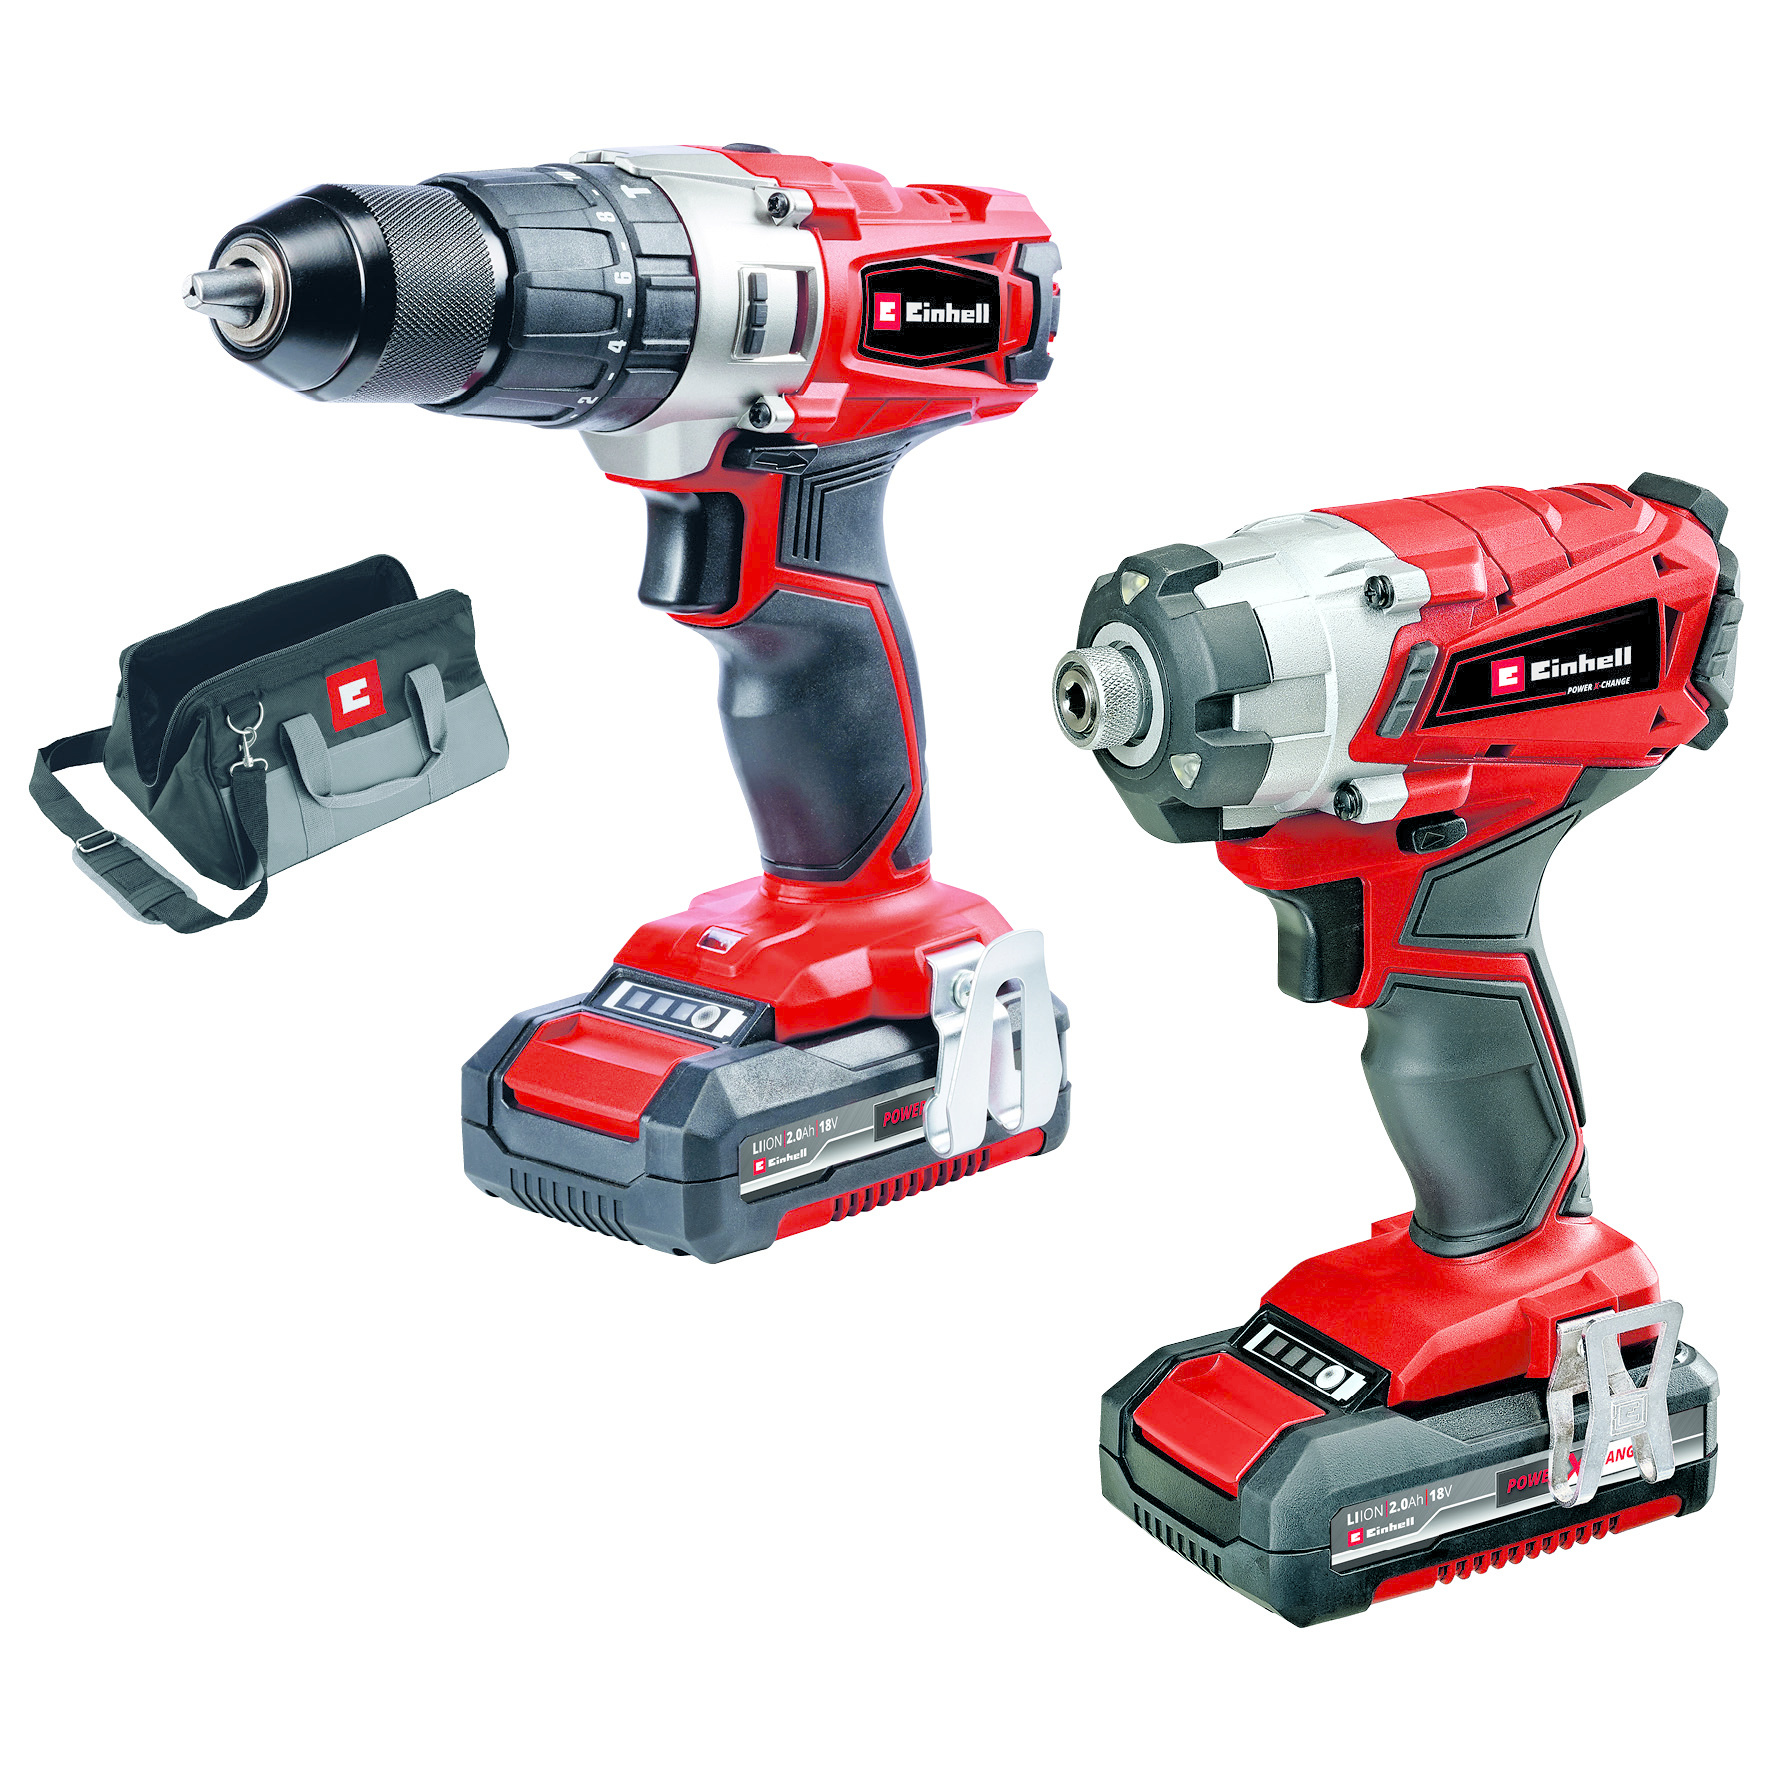 Einhell Accu Power Tool Kit Ah | Morgen in huis - HoukemaTools